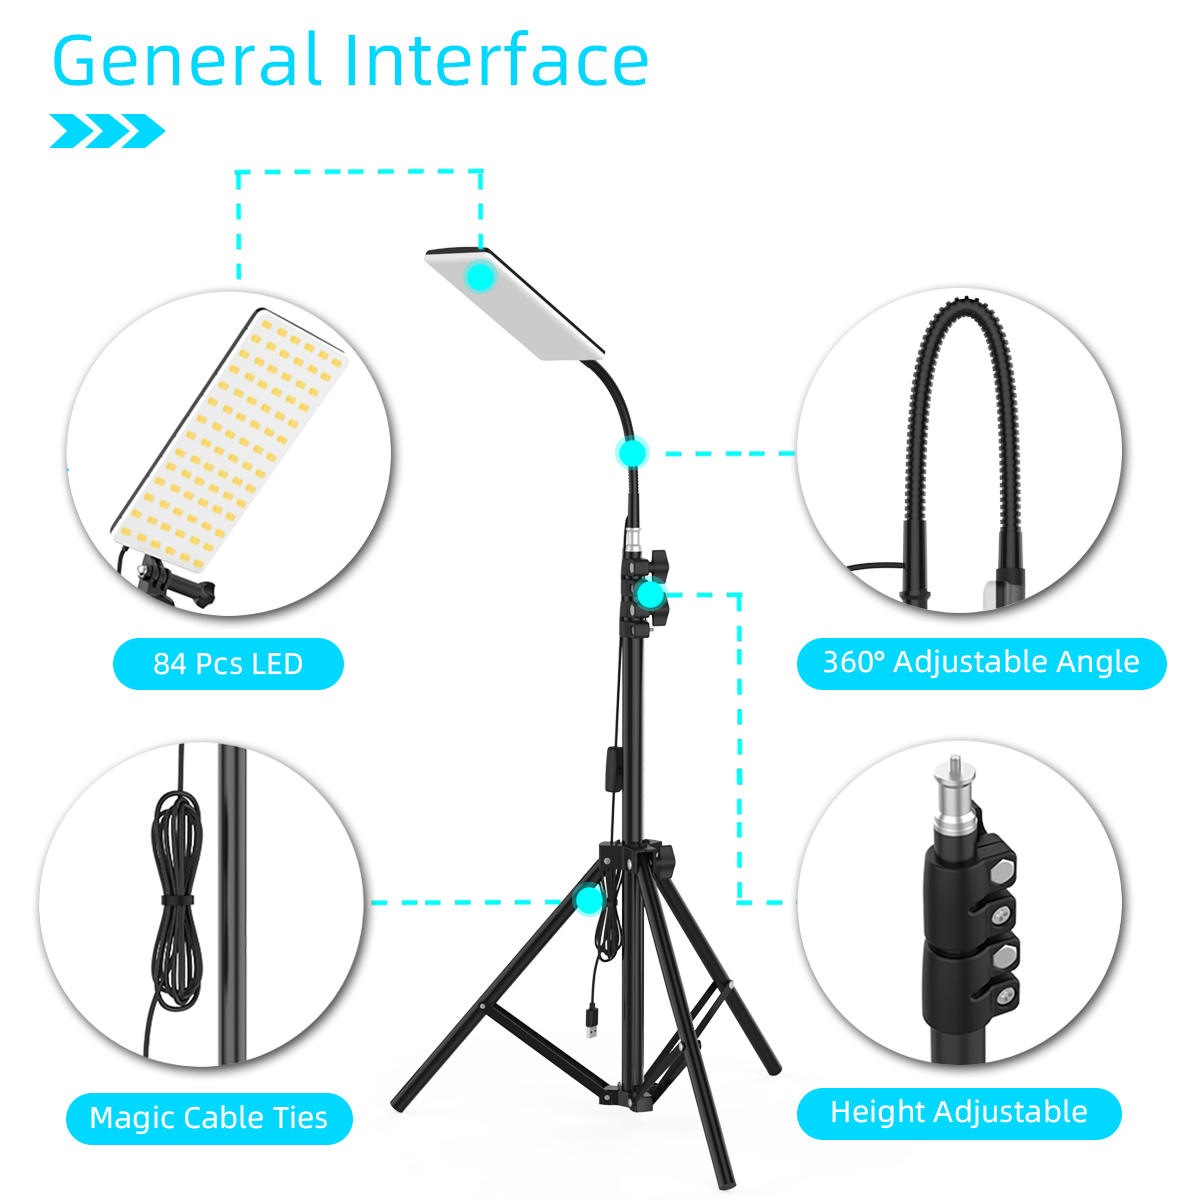 LEORY-84LED-1000LM-Upgraded-Head-18m-Adjustable-Tripod-Stand-Light-Portable-Outdoor-LED-Work-Lamp-Ph-1921214-8